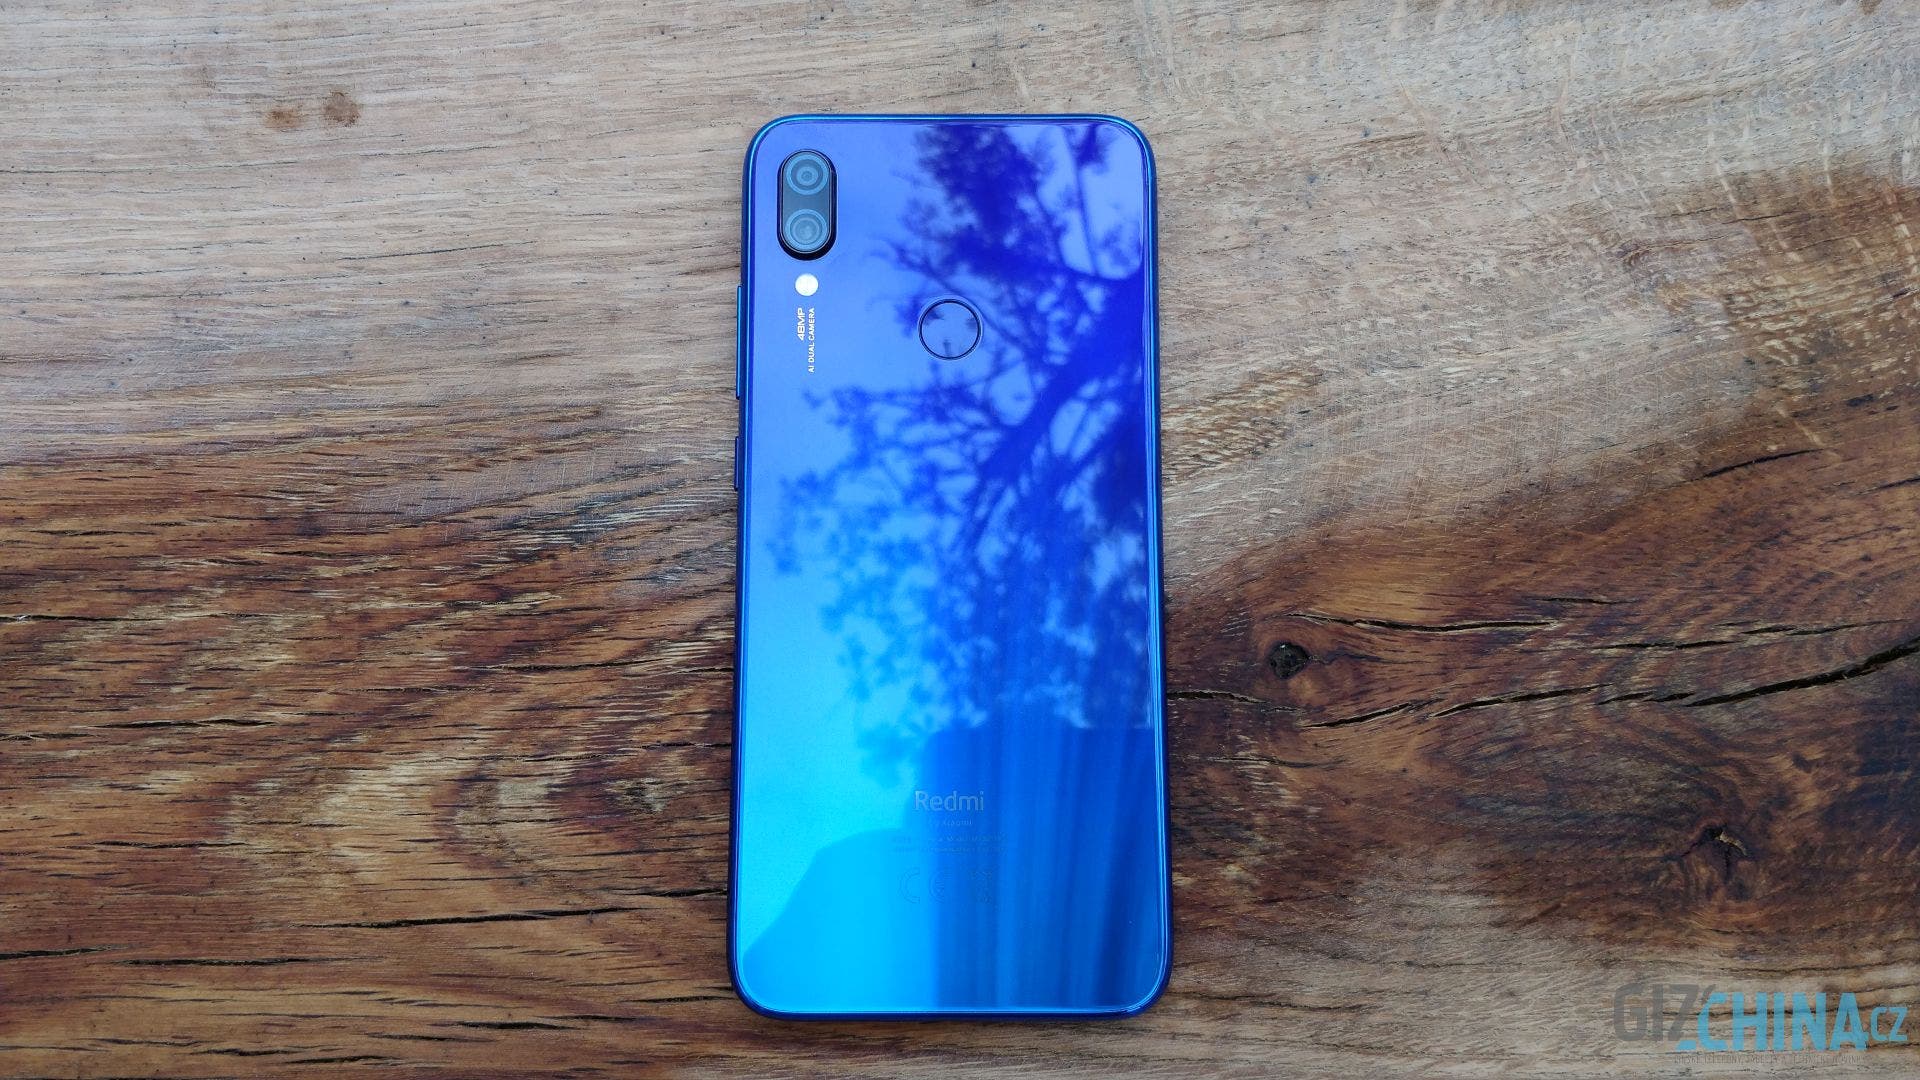 Xiaomi redmi note 7 6. Xiaomi Redmi Note 7. Xiaomi Redmi Note 7 Note. Xiaomi Redmi Note 7 Xiaomi. Xiaomi Redmi Note 7 Blue.